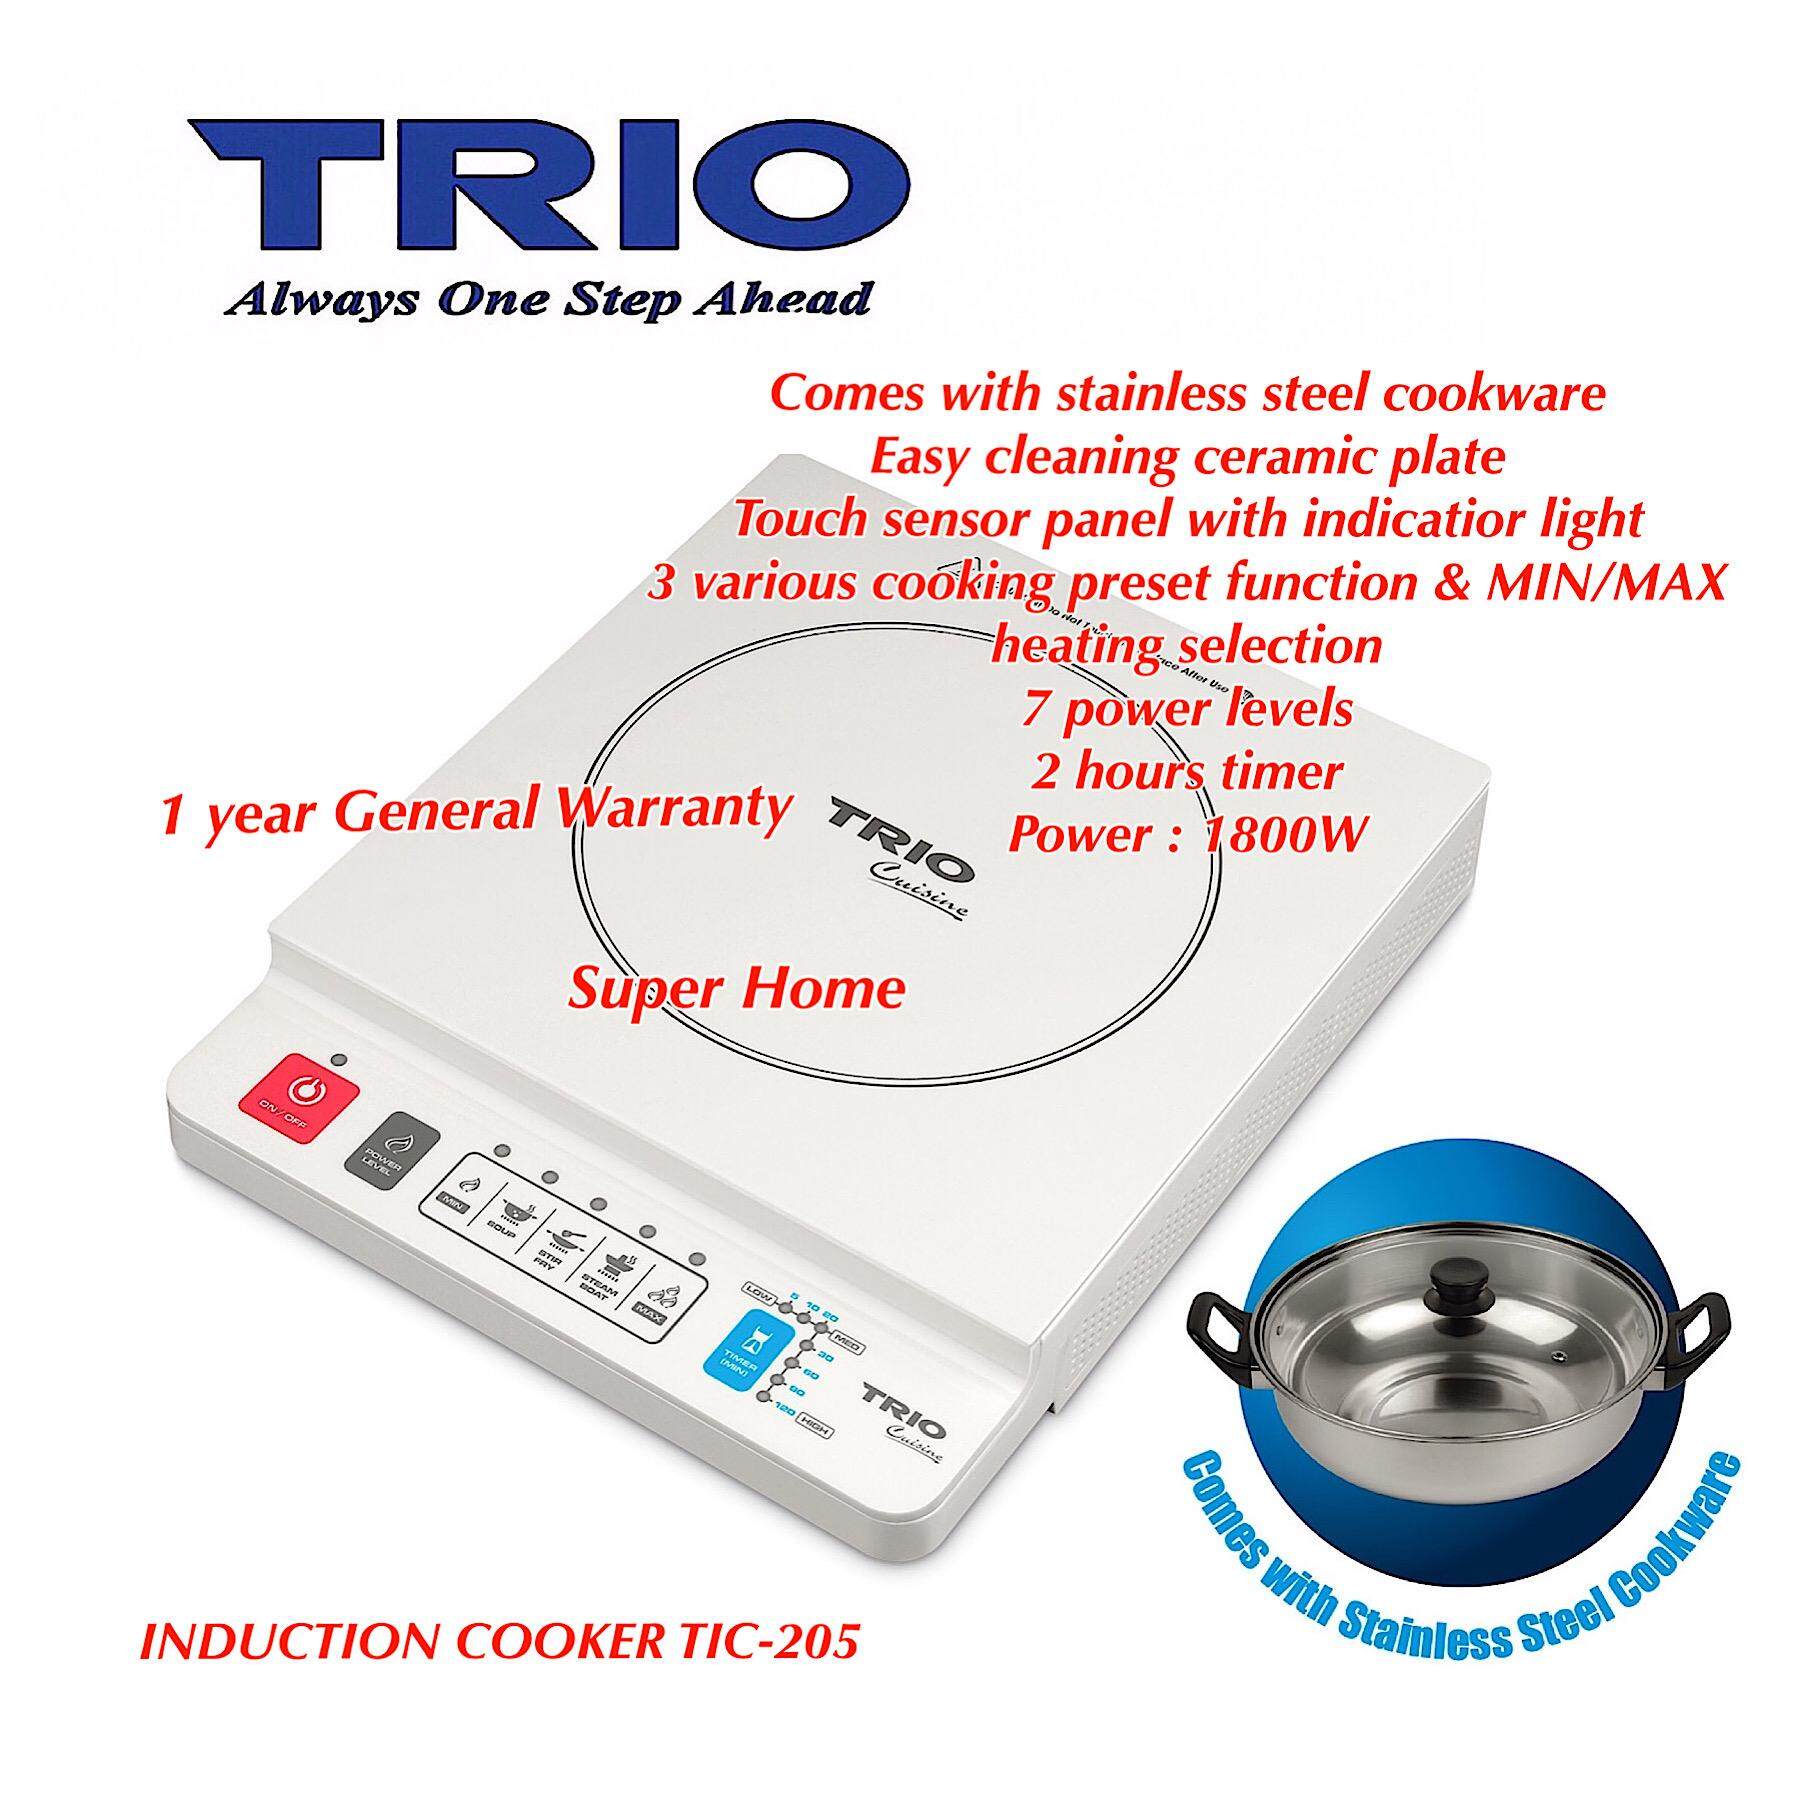 Trio Induction Cooker TIC-205 (Free Stainless Steel Cookware)